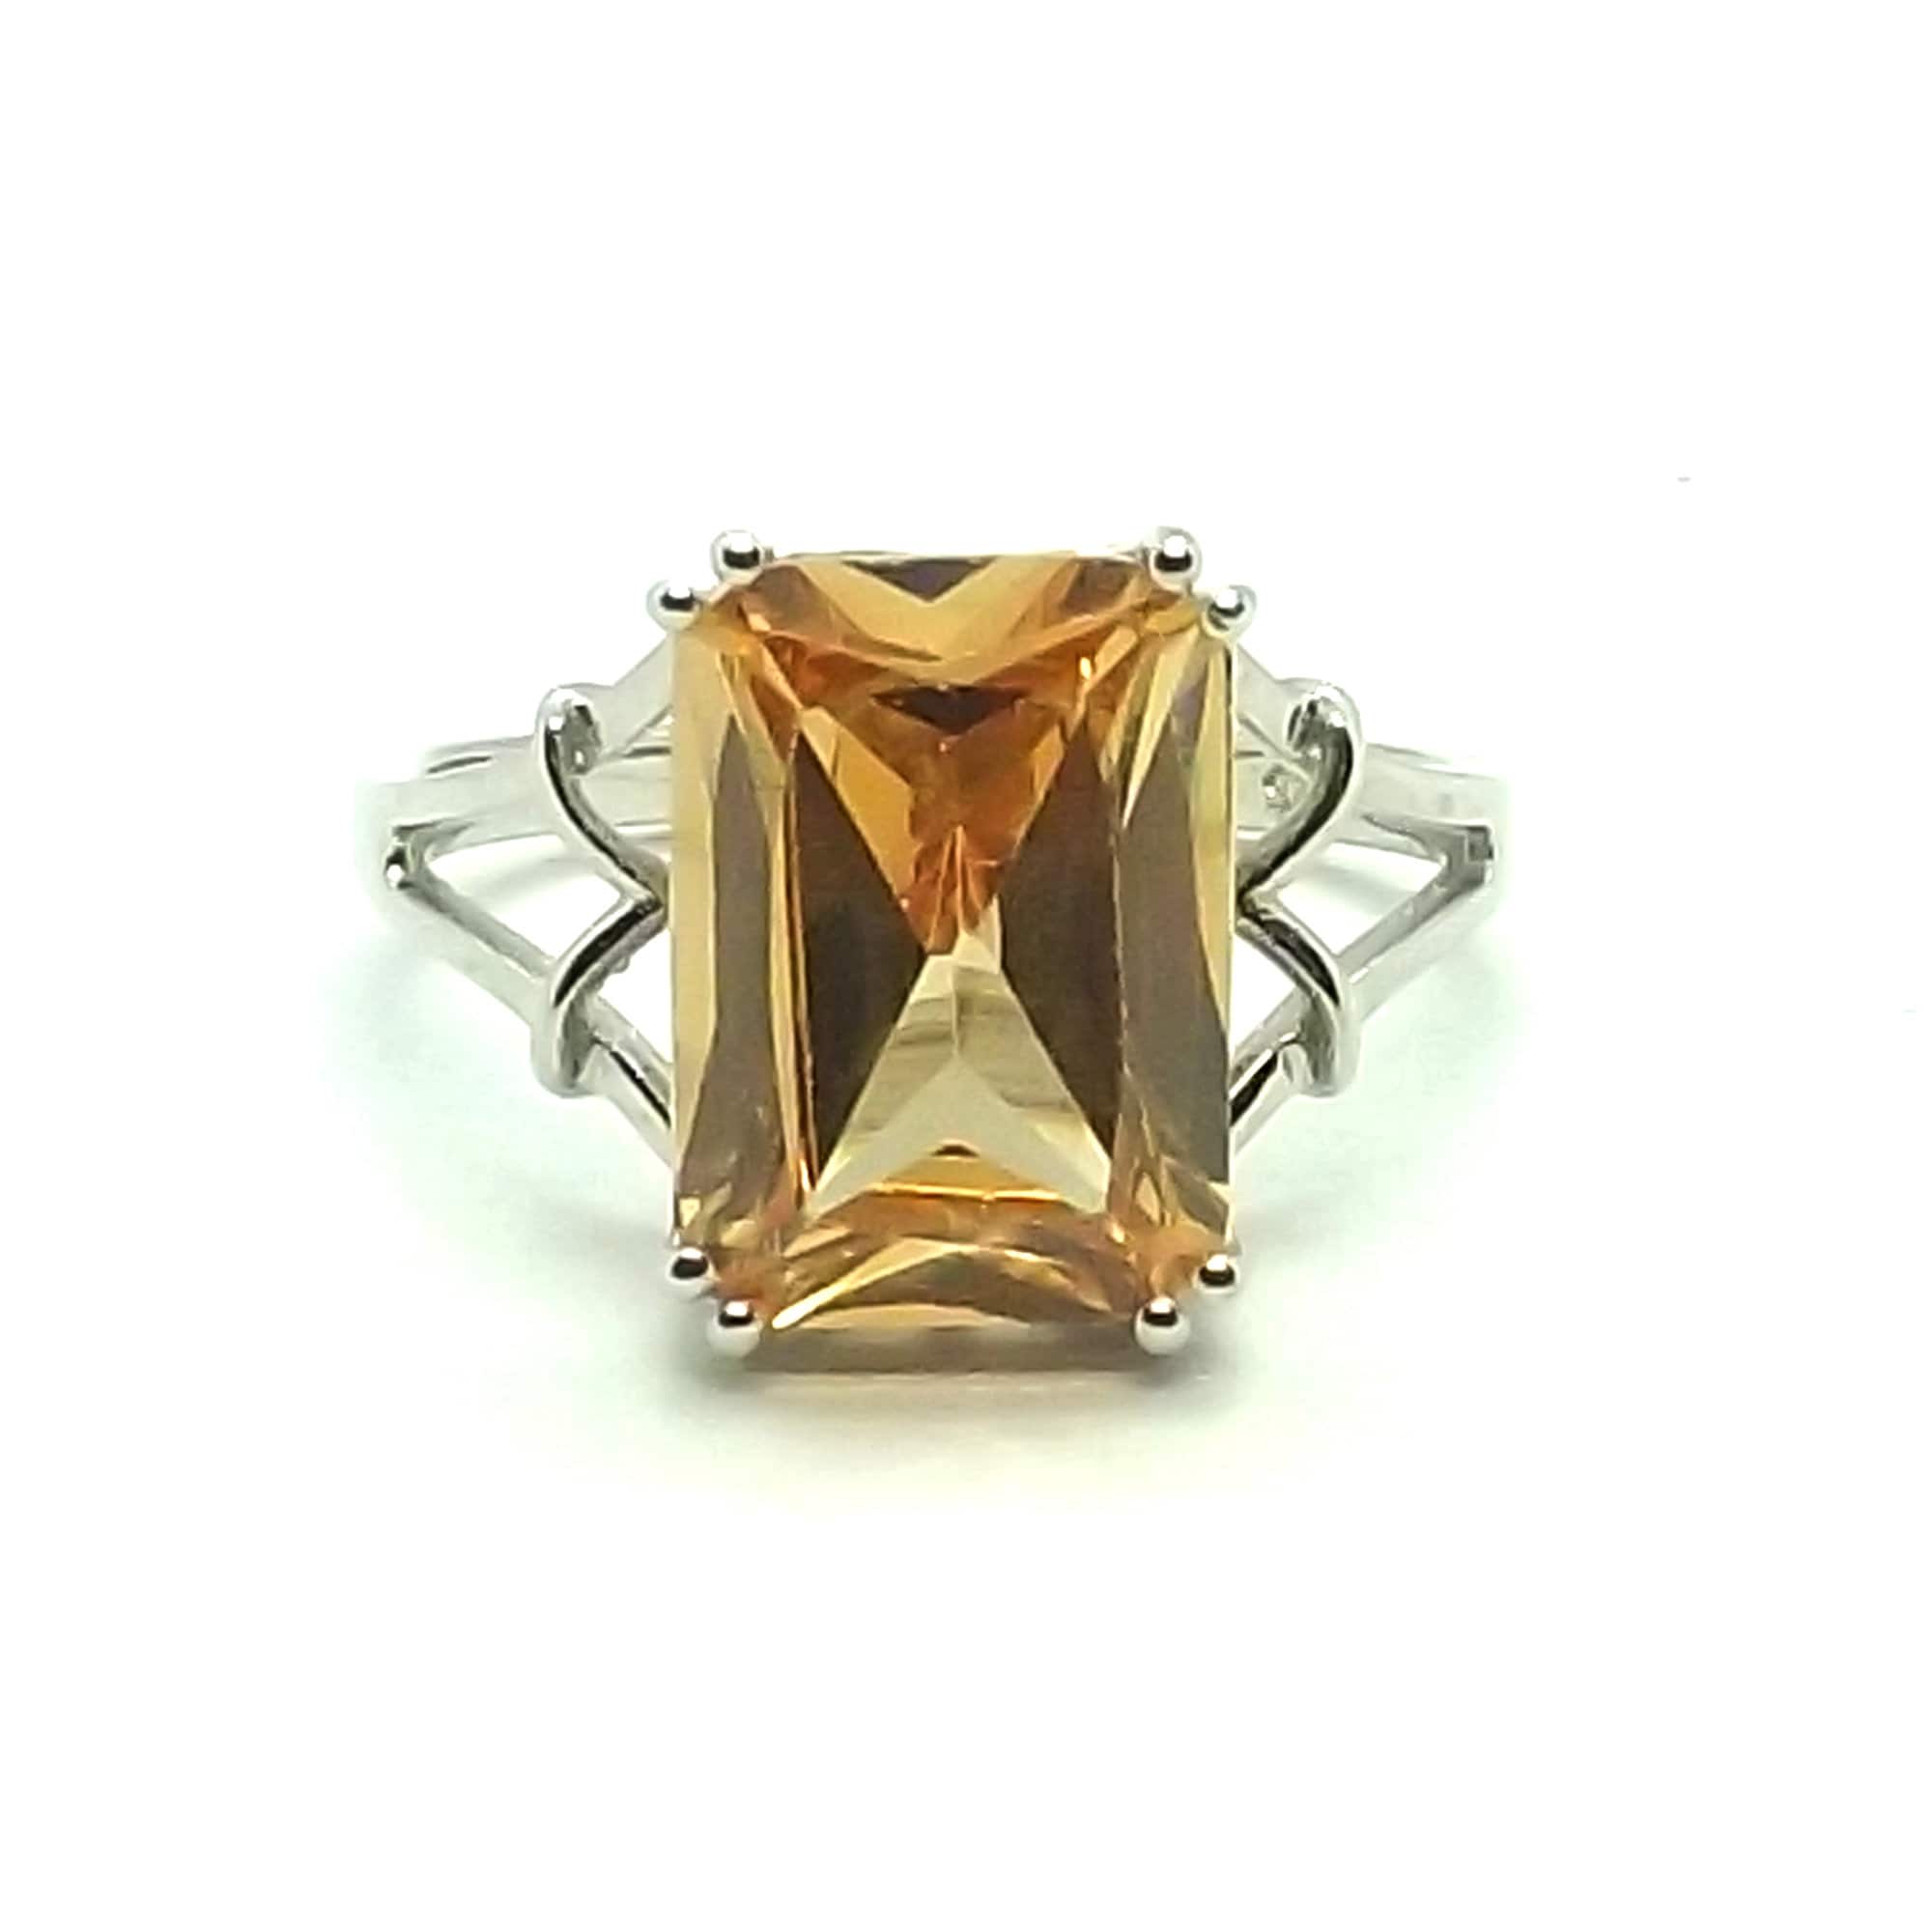 Citrine 925 Sterling Silver Ring Natural Yellow Gemstone Size 4 5 6 7 8 9 10 11